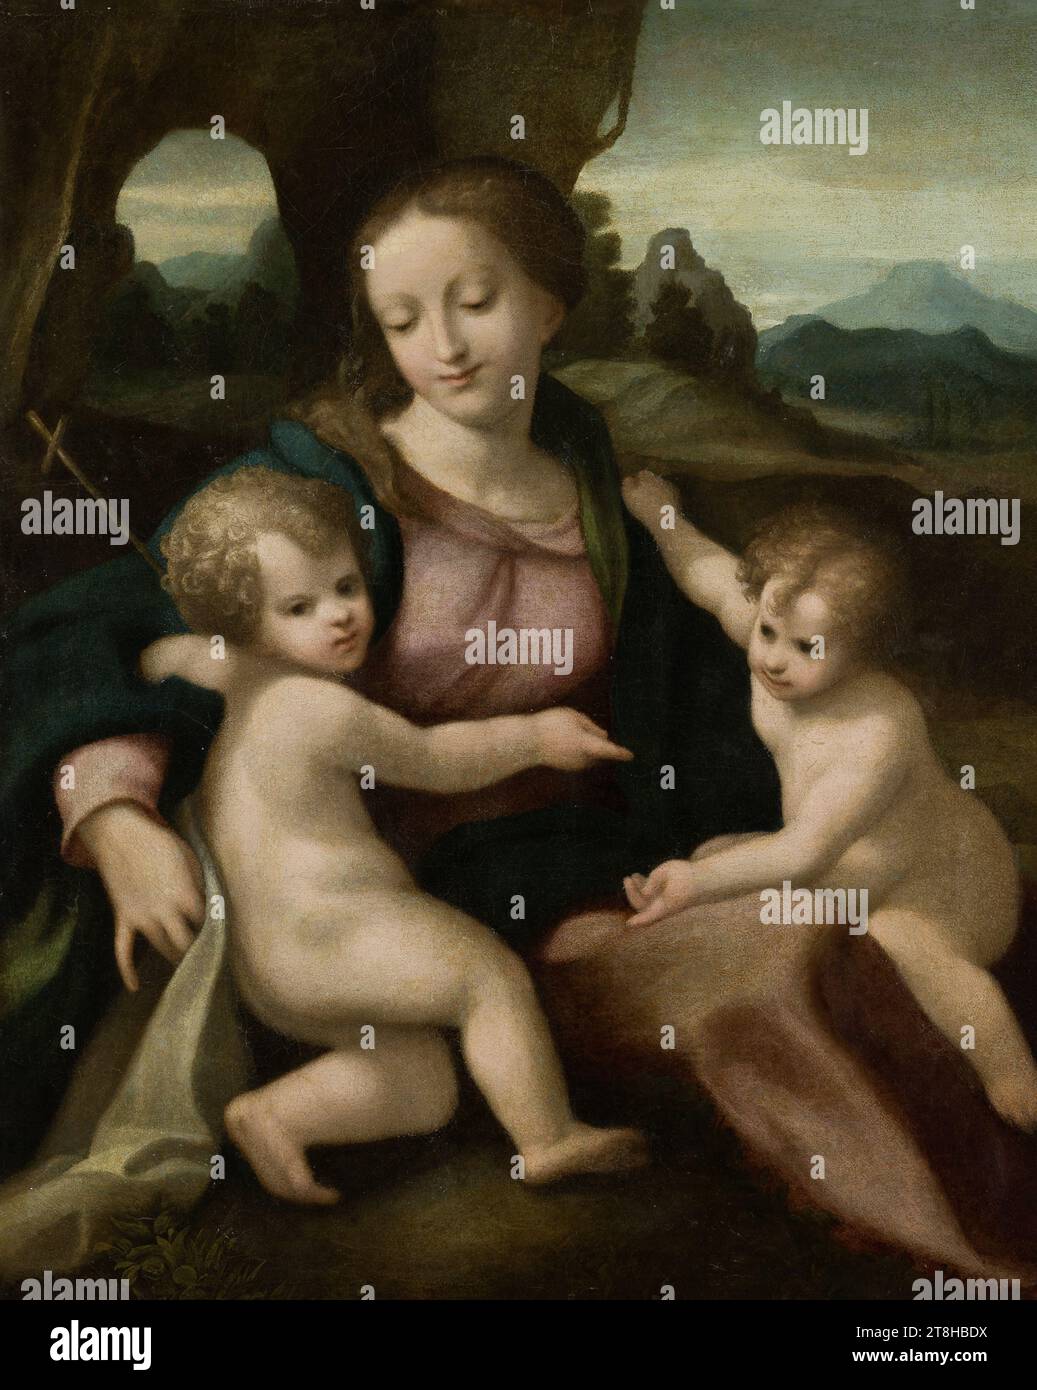 CORREGGIO, Madonna with child and boy St. John, approx. 1522 - 1523, dimensions, 90.5 x 72.2 cm, oil on canvas, Madonna with child and boy St. John, painter, CORREGGIO, 16TH CENTURY, RENAISSANCE, PAINTING, oil on canvas, CANVAS, OIL Stock Photo